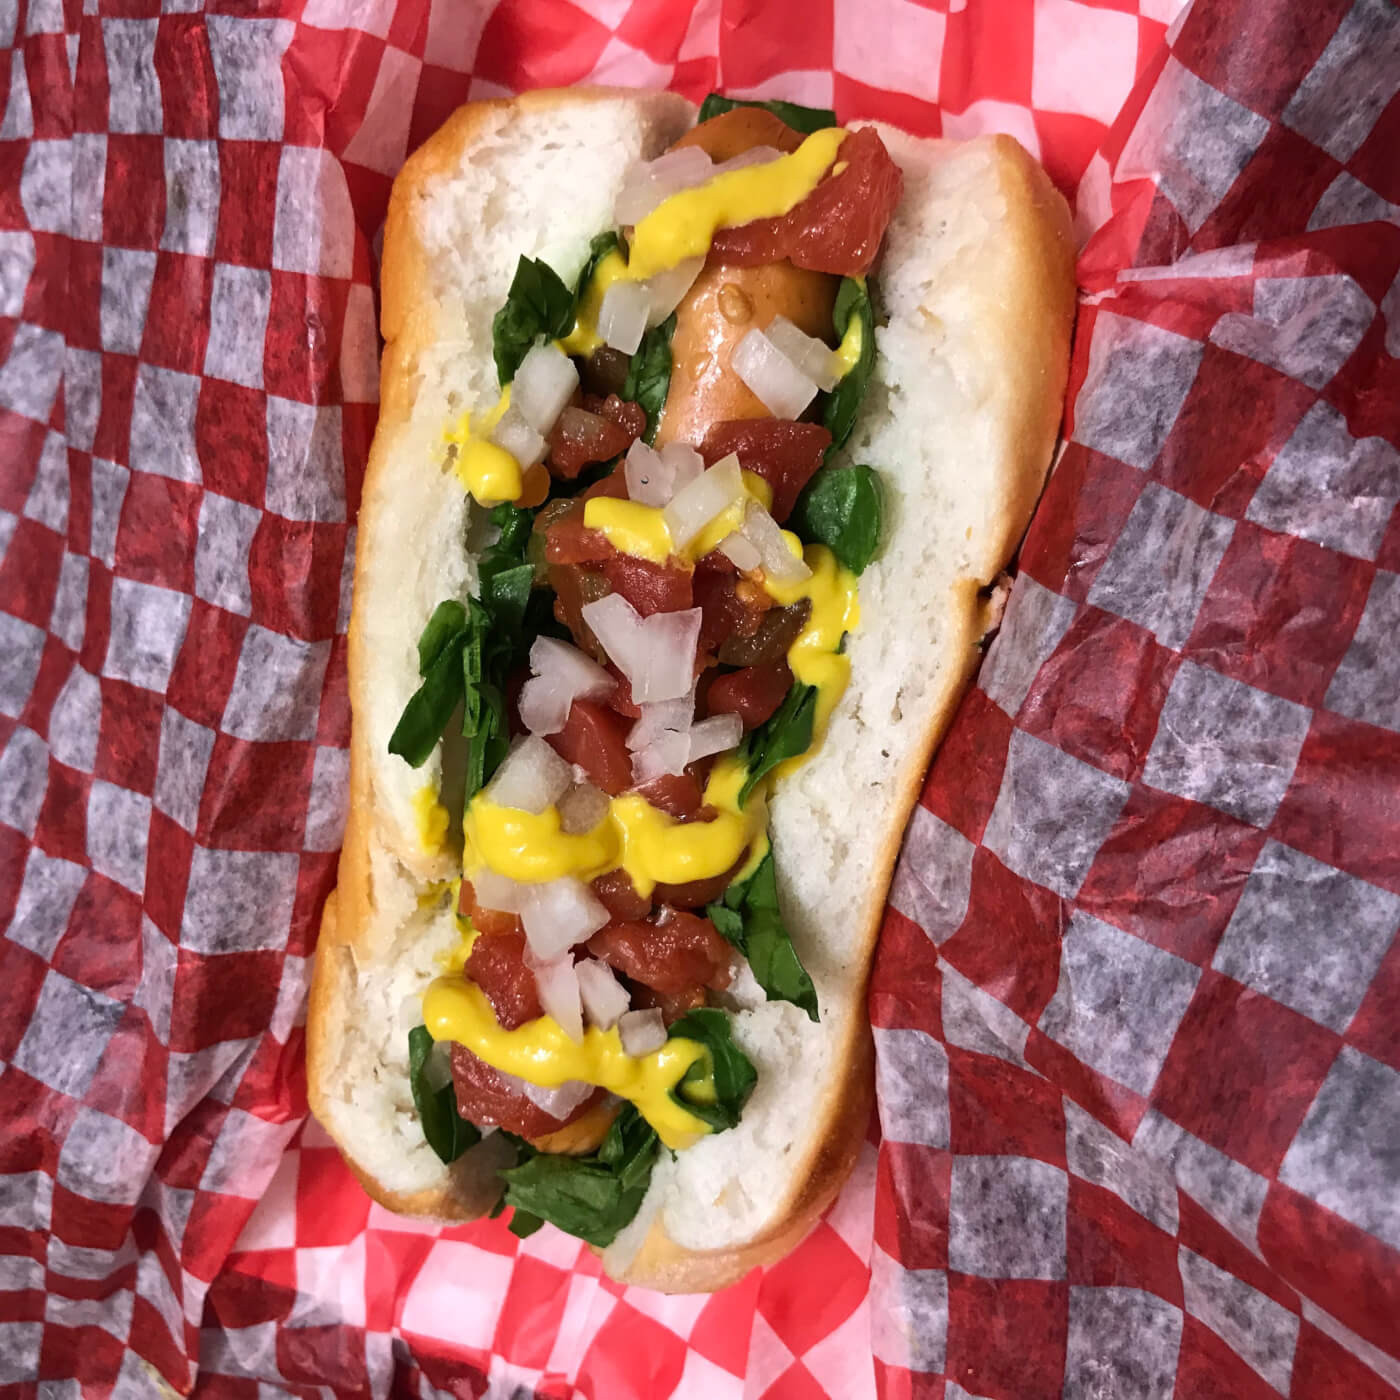 Vegan Hot Dogs
 These Are the Top 10 Vegan Hot Dogs in the U S